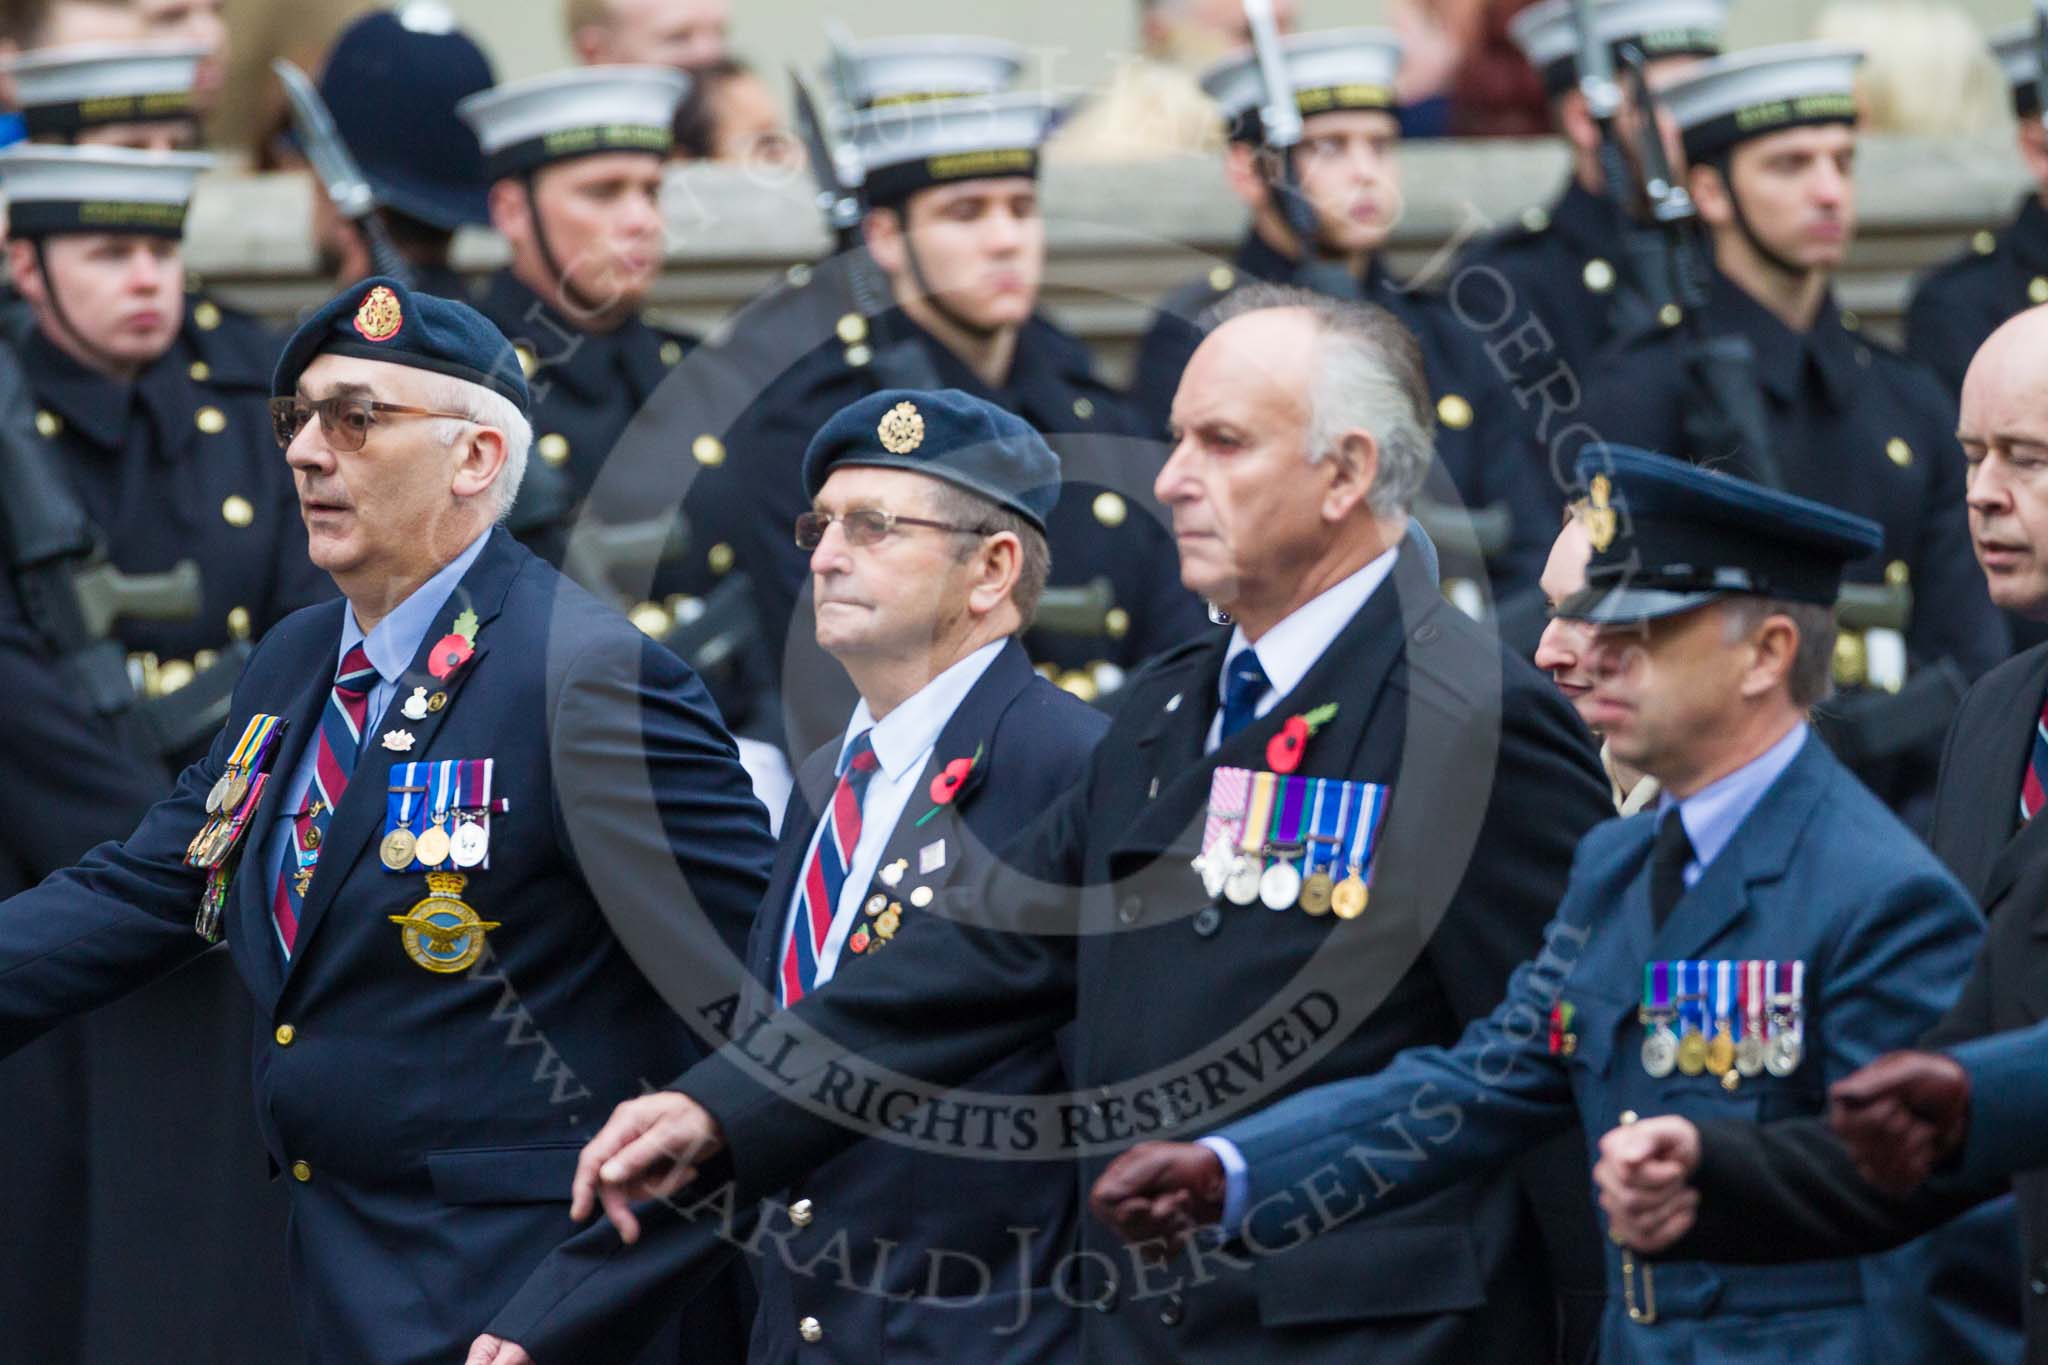 Remembrance Sunday at the Cenotaph 2015: Group C16, RAFSE(s) Assoc (New for 2015).
Cenotaph, Whitehall, London SW1,
London,
Greater London,
United Kingdom,
on 08 November 2015 at 11:49, image #511